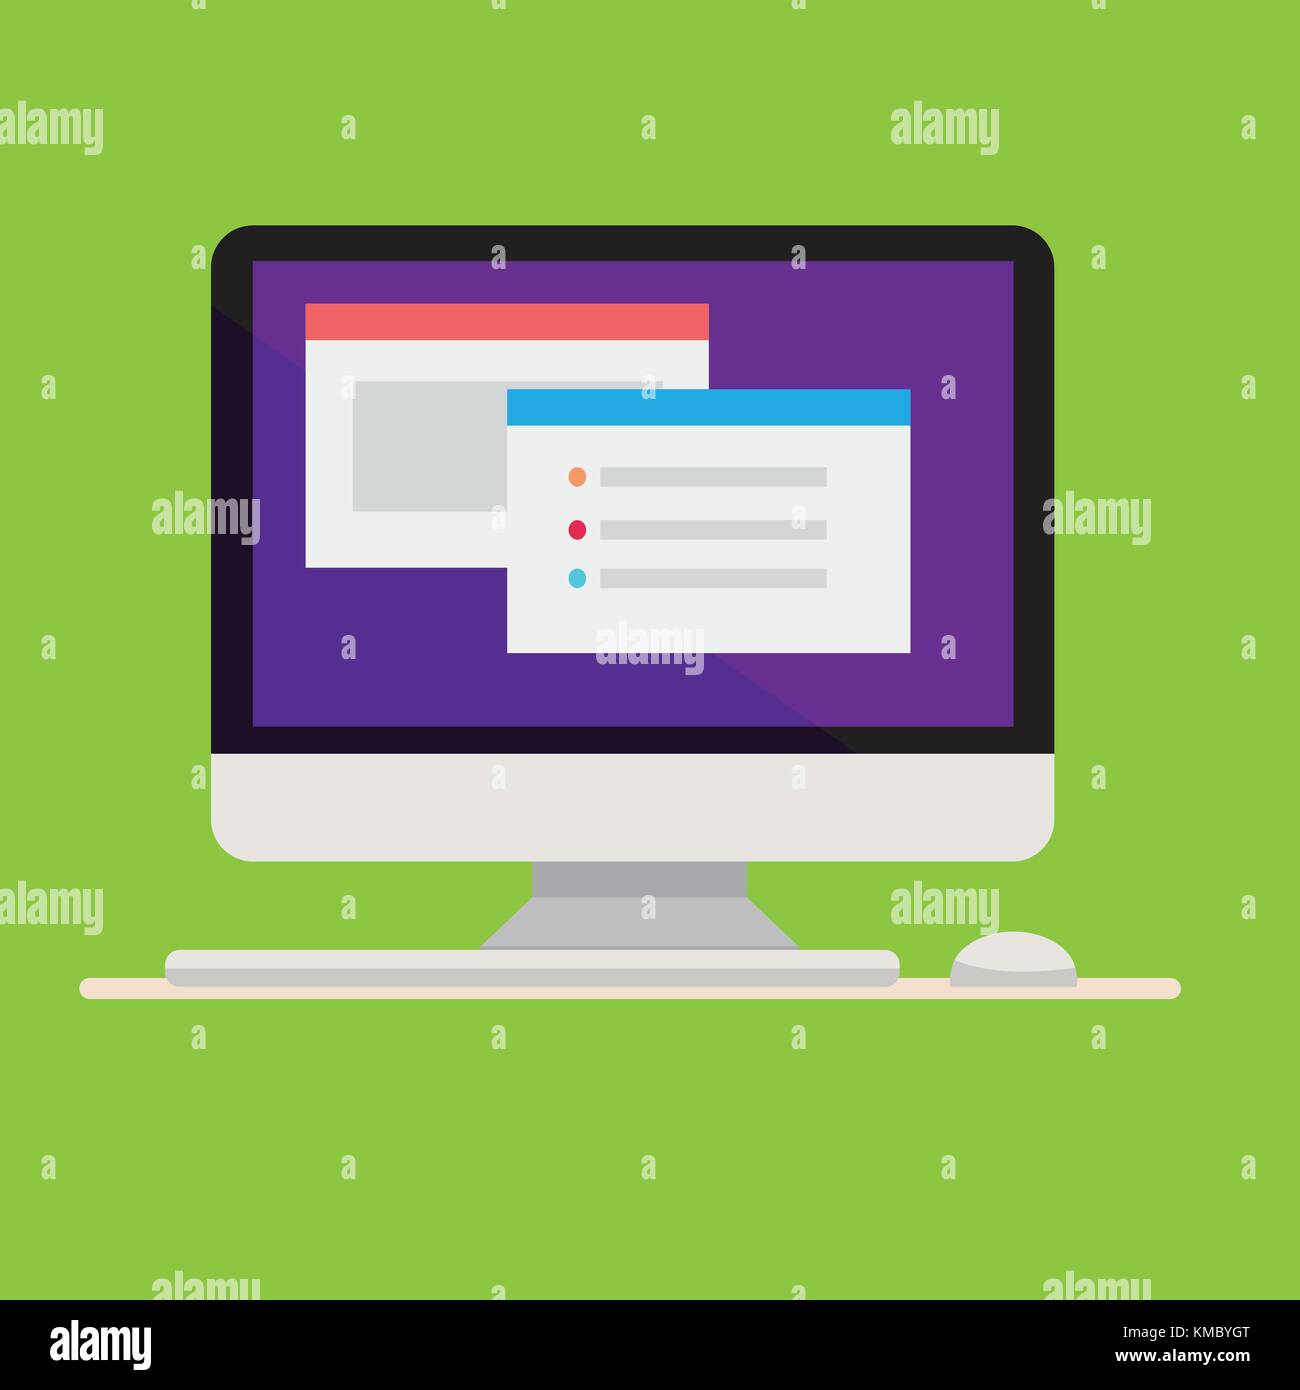 Flat computer design with keyboard and mouse, window tab on blue screen vector illustration. Stock Vector